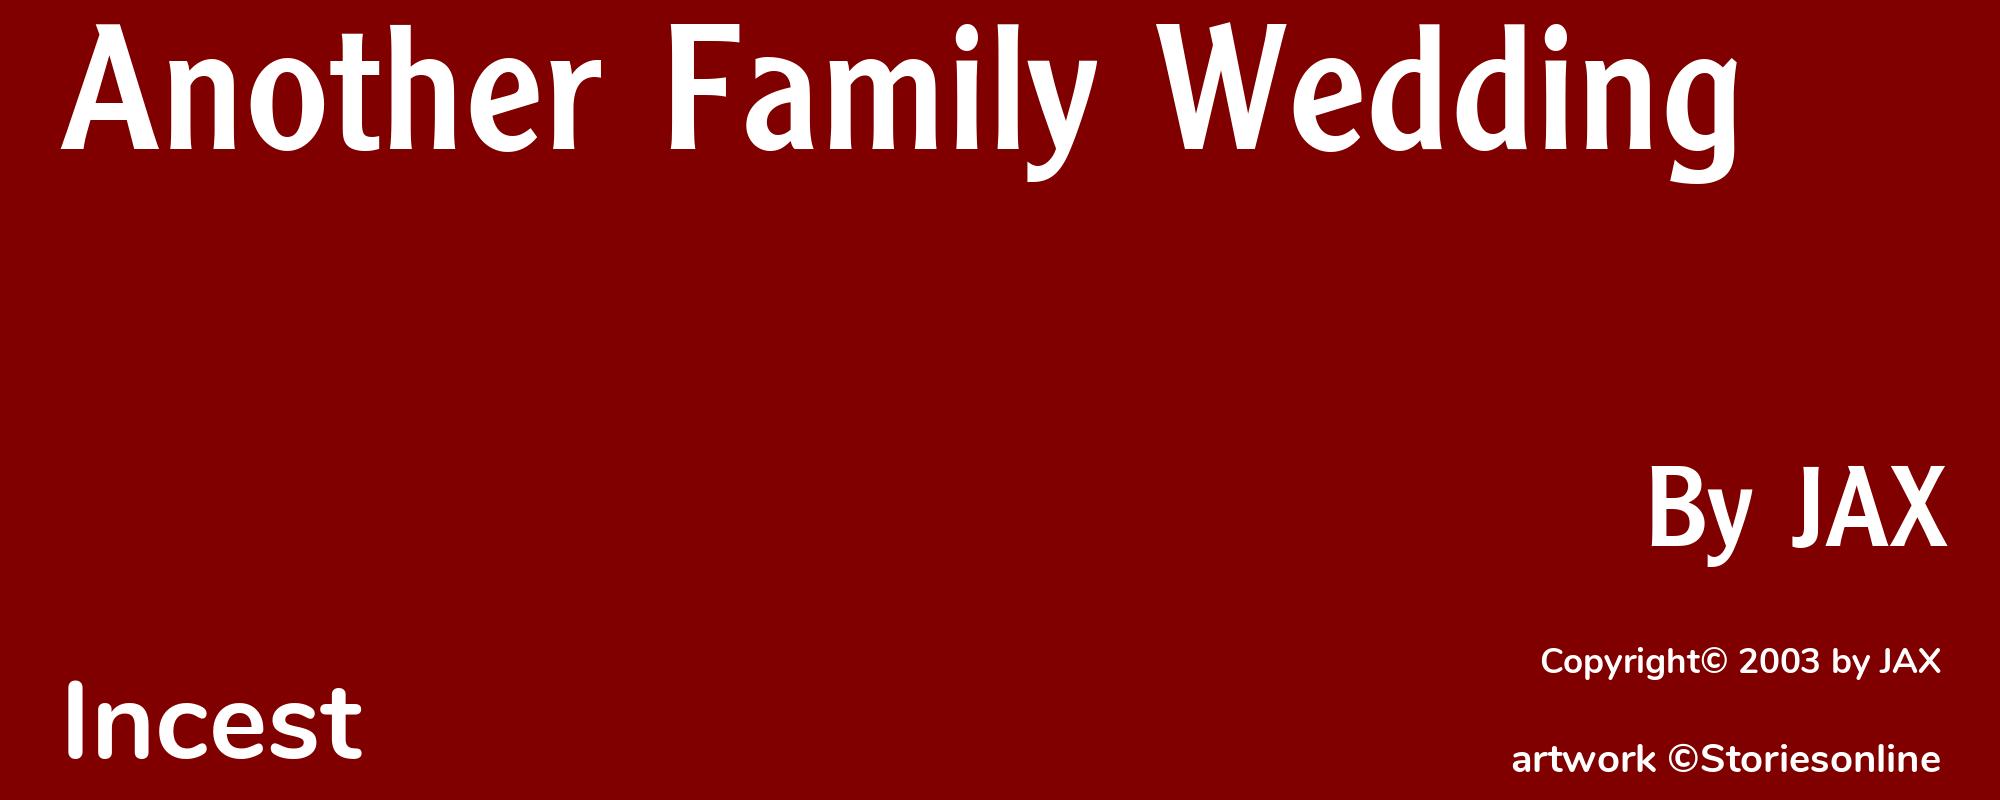 Another Family Wedding - Cover